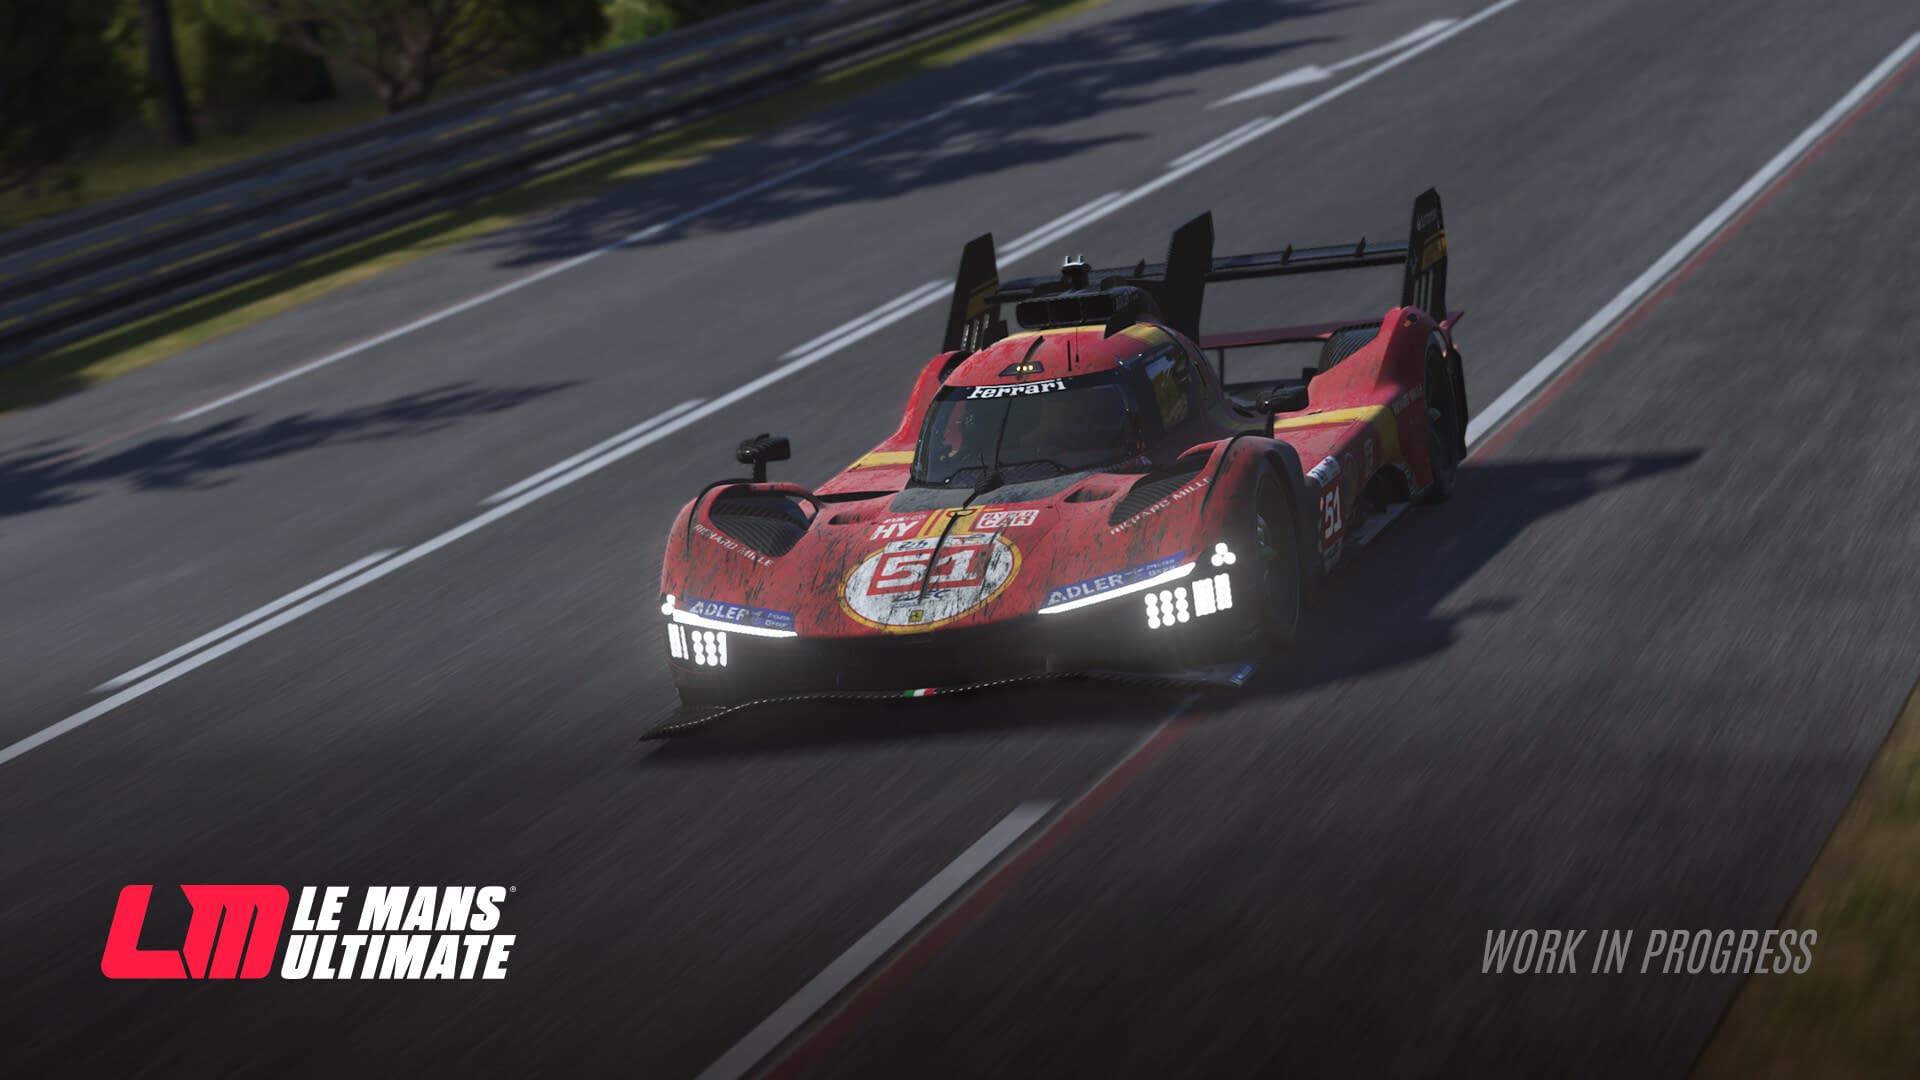 Pist Based Le Mans Ultimate Comes On February 20